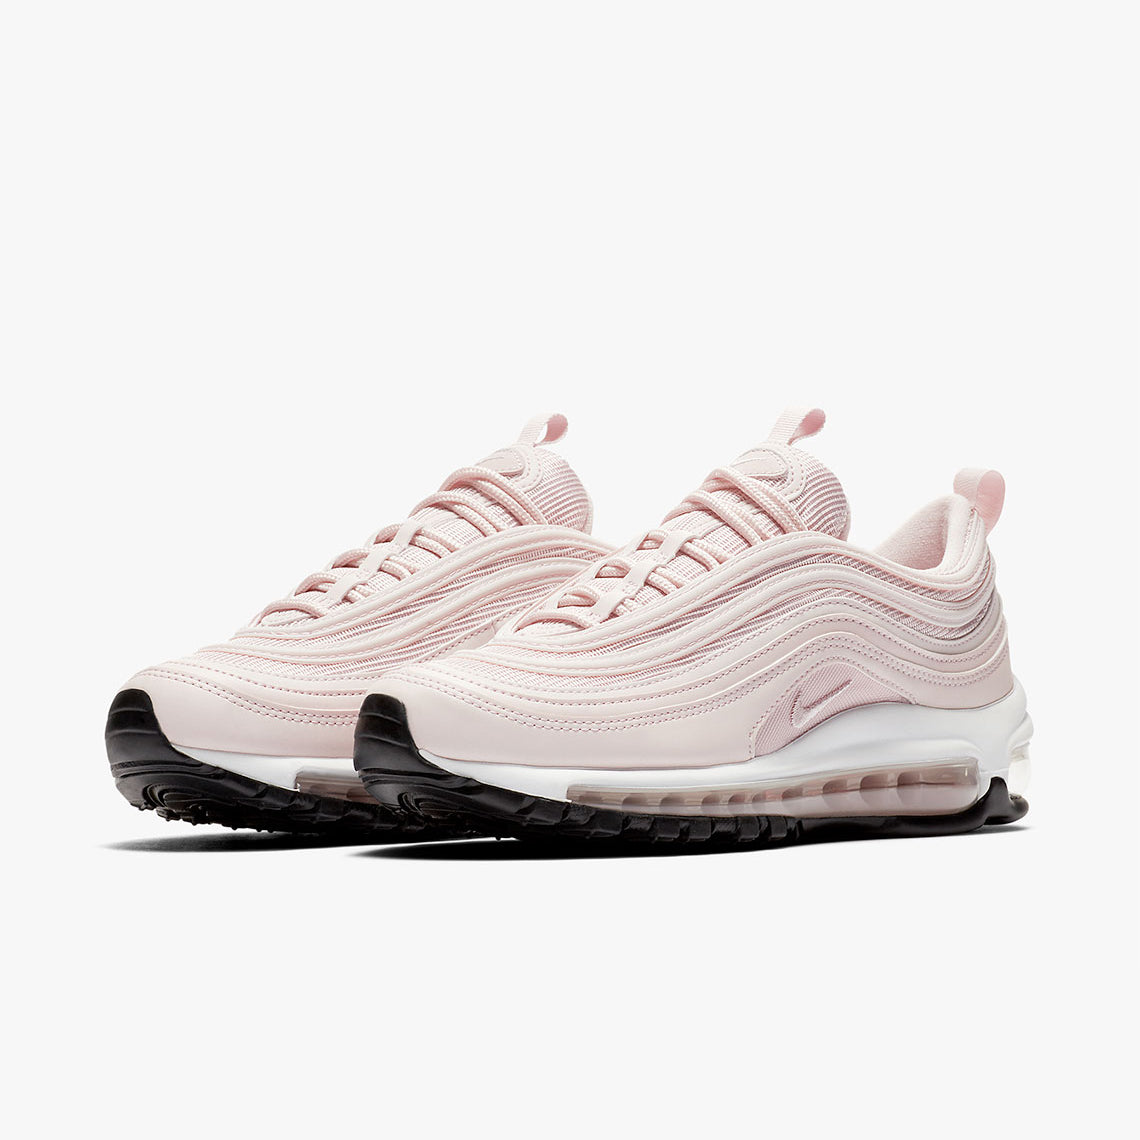 Nike Wmns Air Max 97 BARELY ROSE/BARELY 